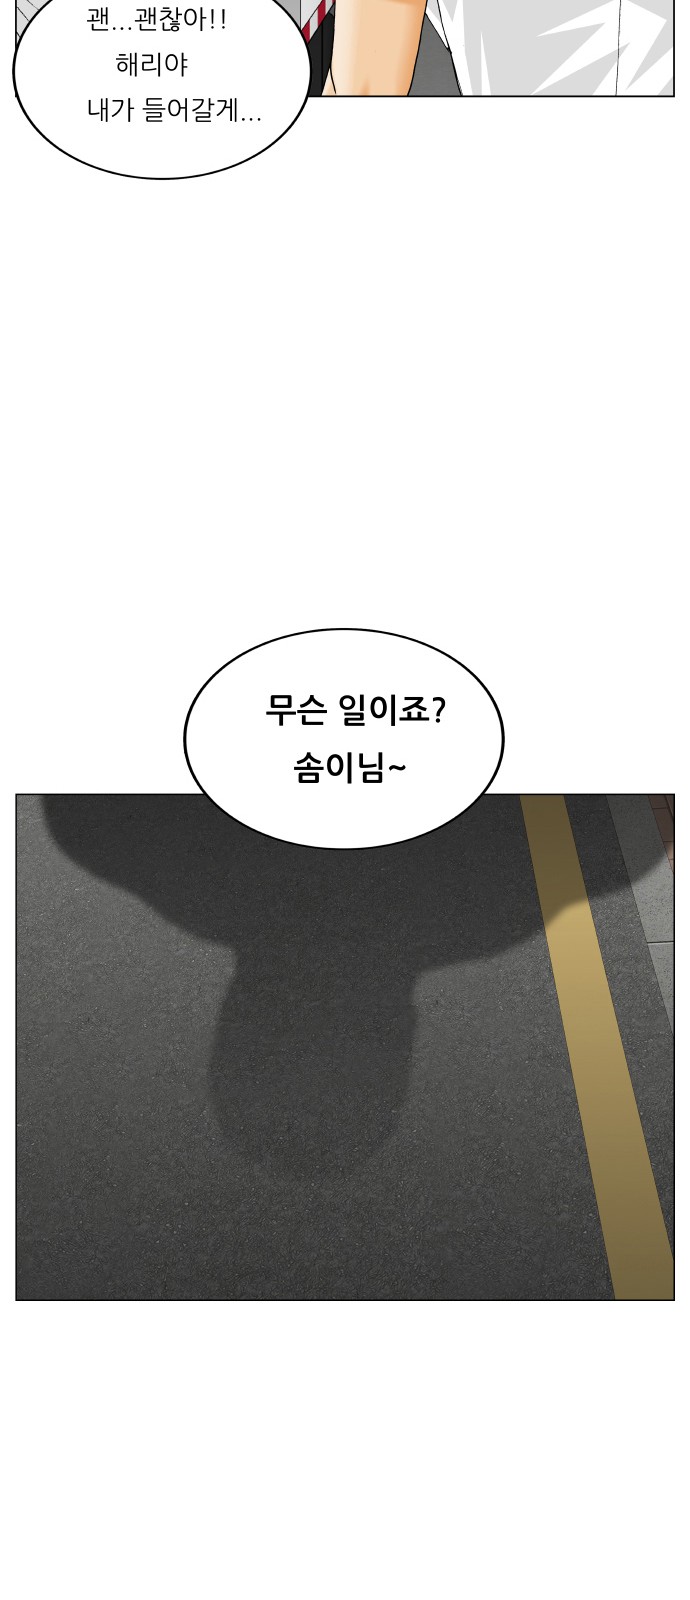 Ultimate Legend - Kang Hae Hyo - Chapter 405 - Page 3